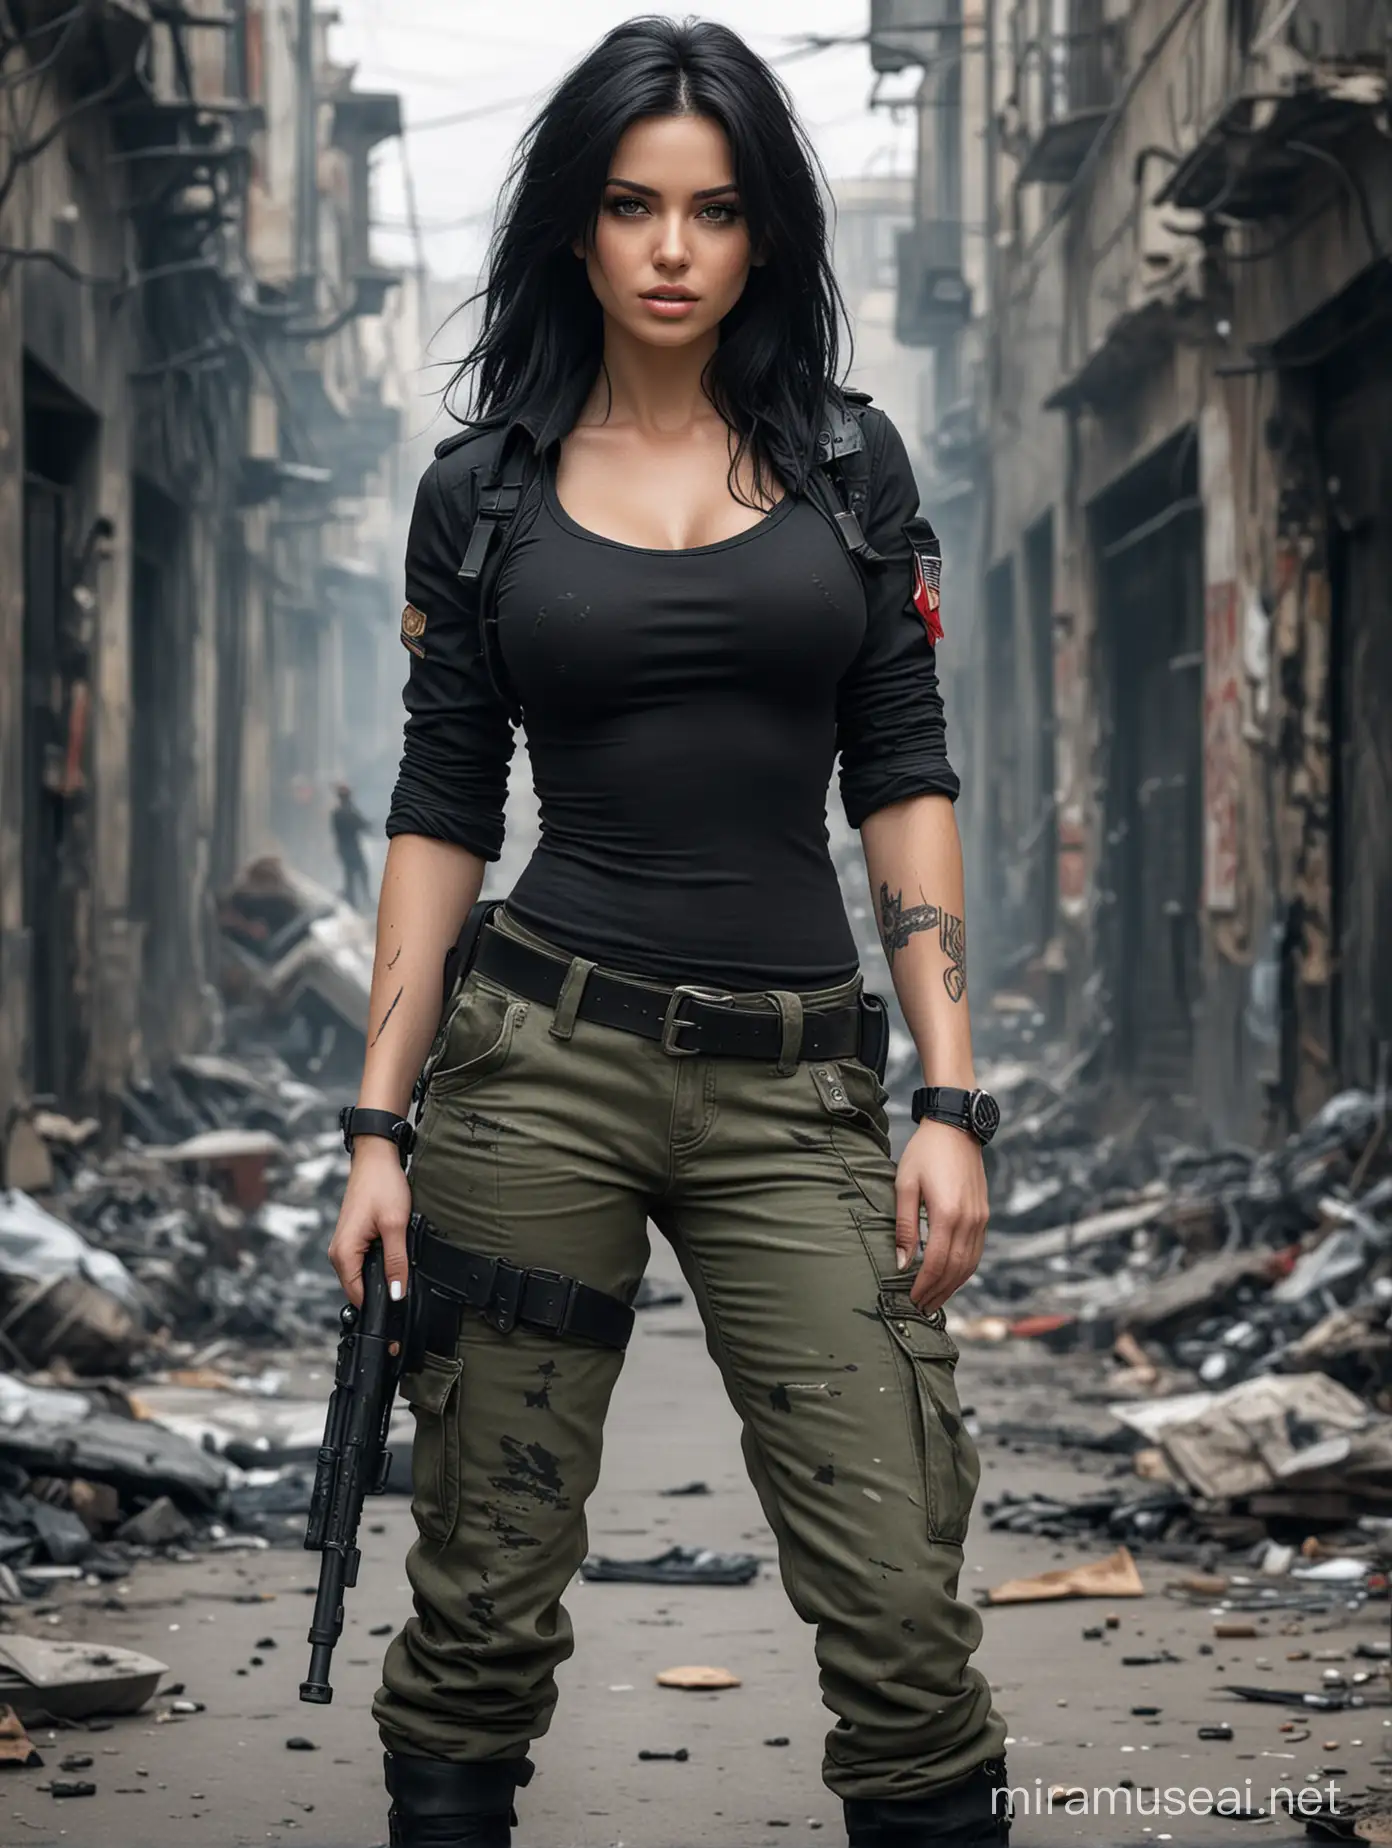 Ultra realistic, white skin, black hair, beautiful face, sexy figure, hot girl, in military pants, standing tough after brutal fight, injuries on several body parts, on street